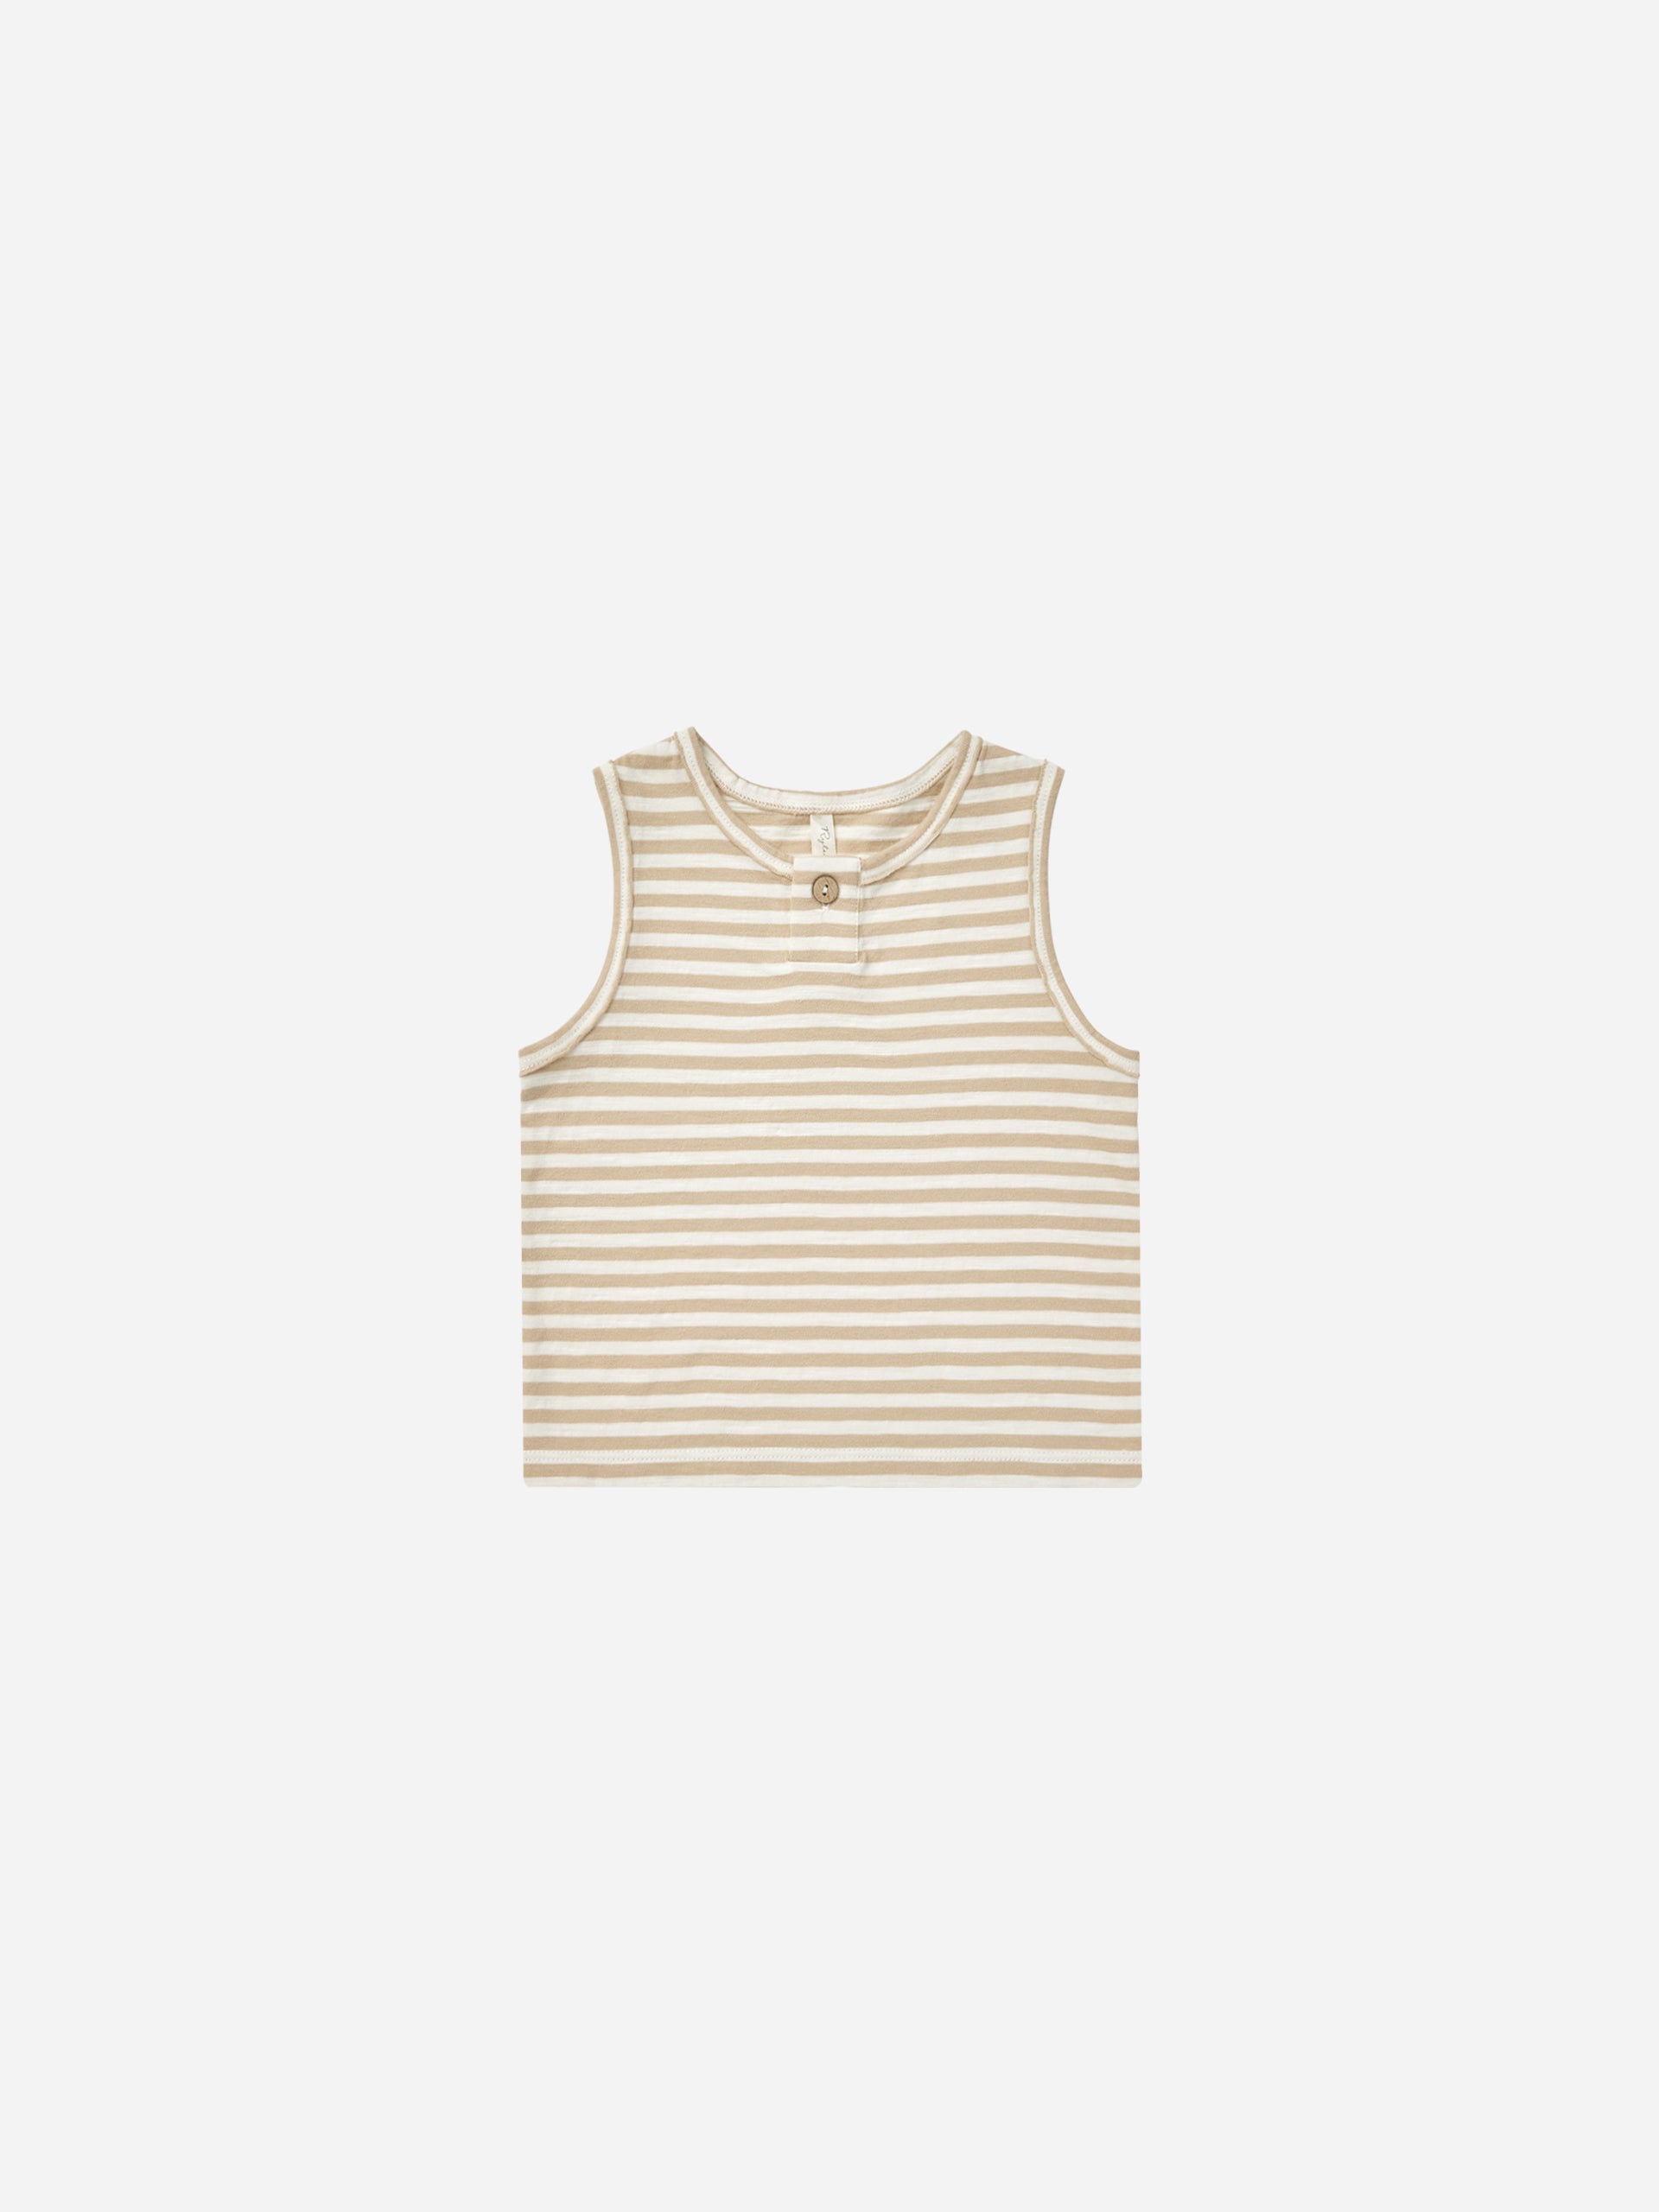 Jersey Button Tank || Sand Stripe - Rylee + Cru | Kids Clothes | Trendy Baby Clothes | Modern Infant Outfits |